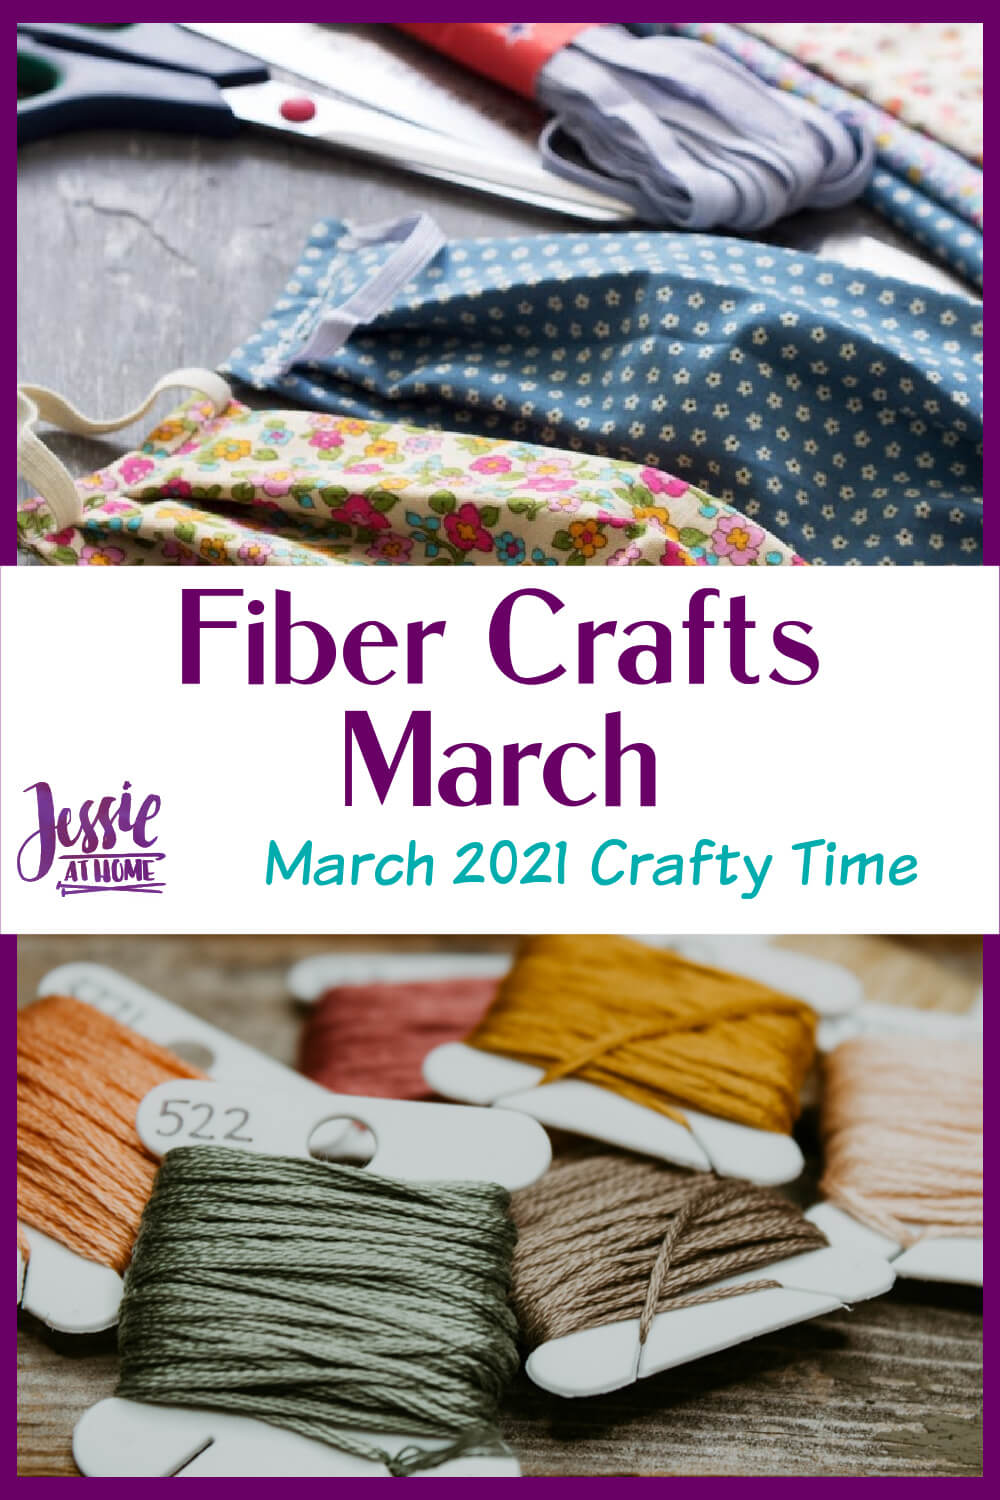 Fiber Crafts March - March 2021 Crafty Time with Jessie